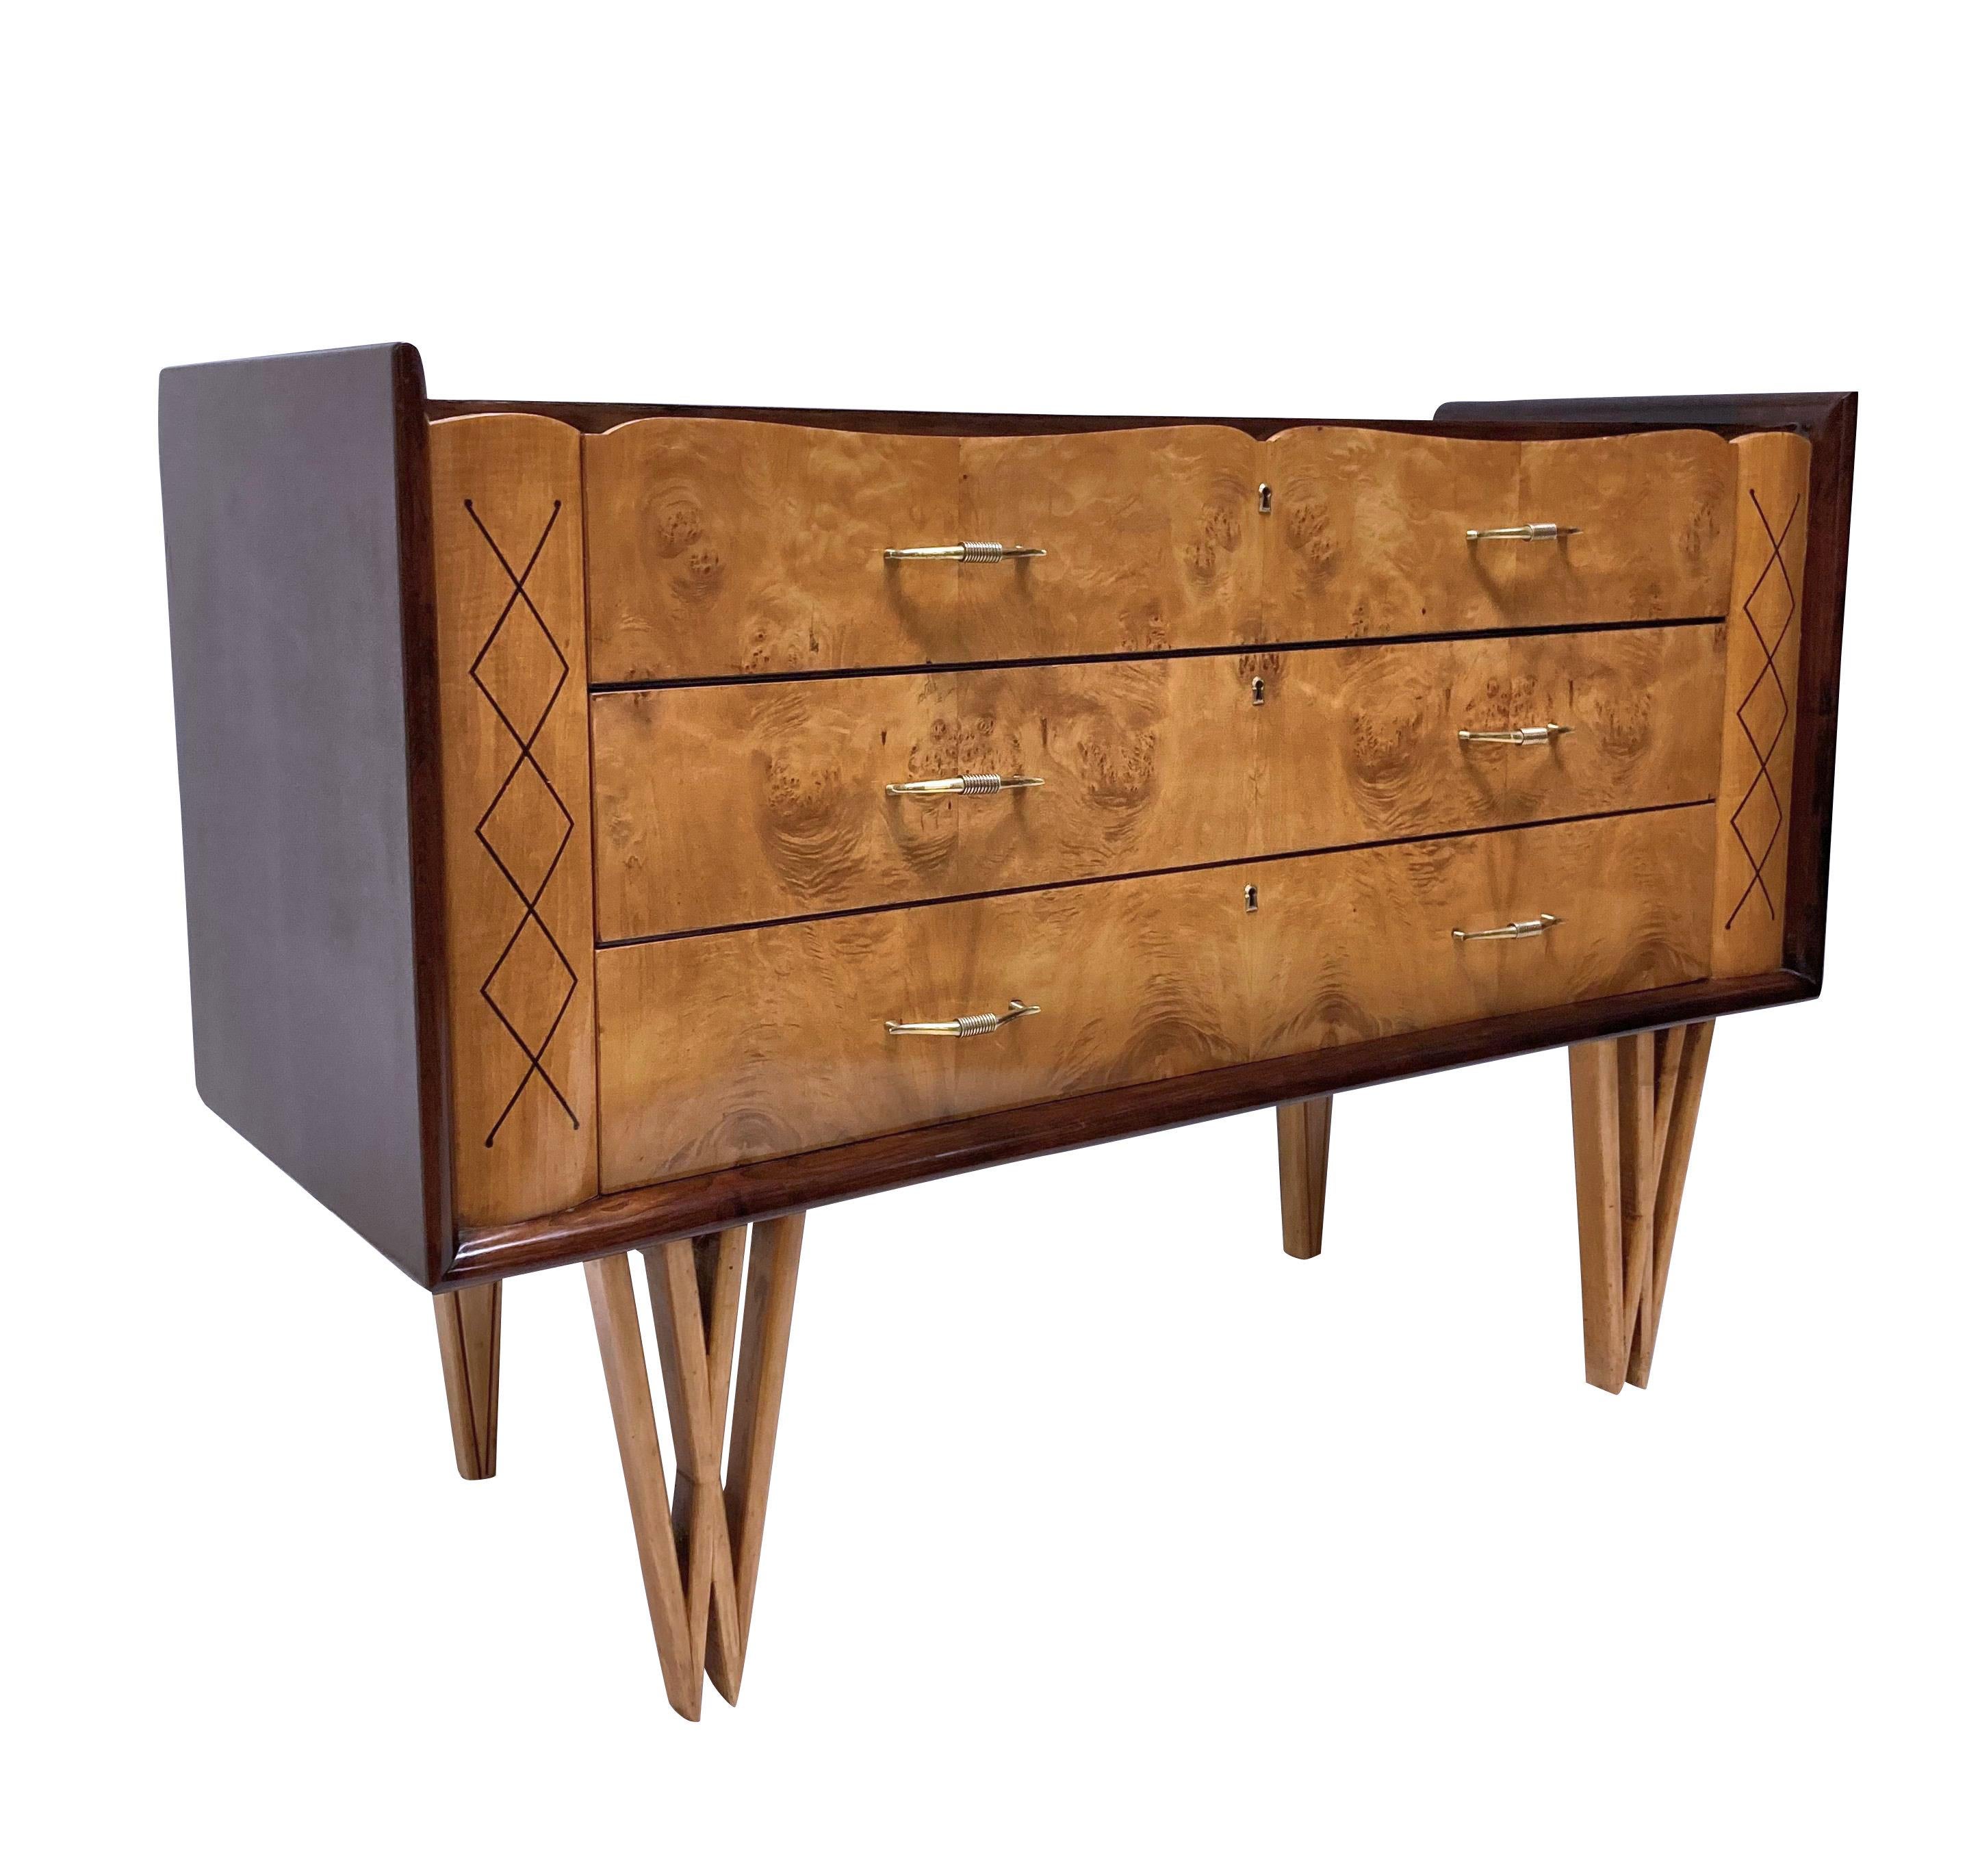 A stylish French Mid-Century credenza of unusual design. With three drawers in walnut, each with elegant brass handles. Supported on double 'v' shaped front legs in fruitwood and the drawers each flanked by a hand painted design.